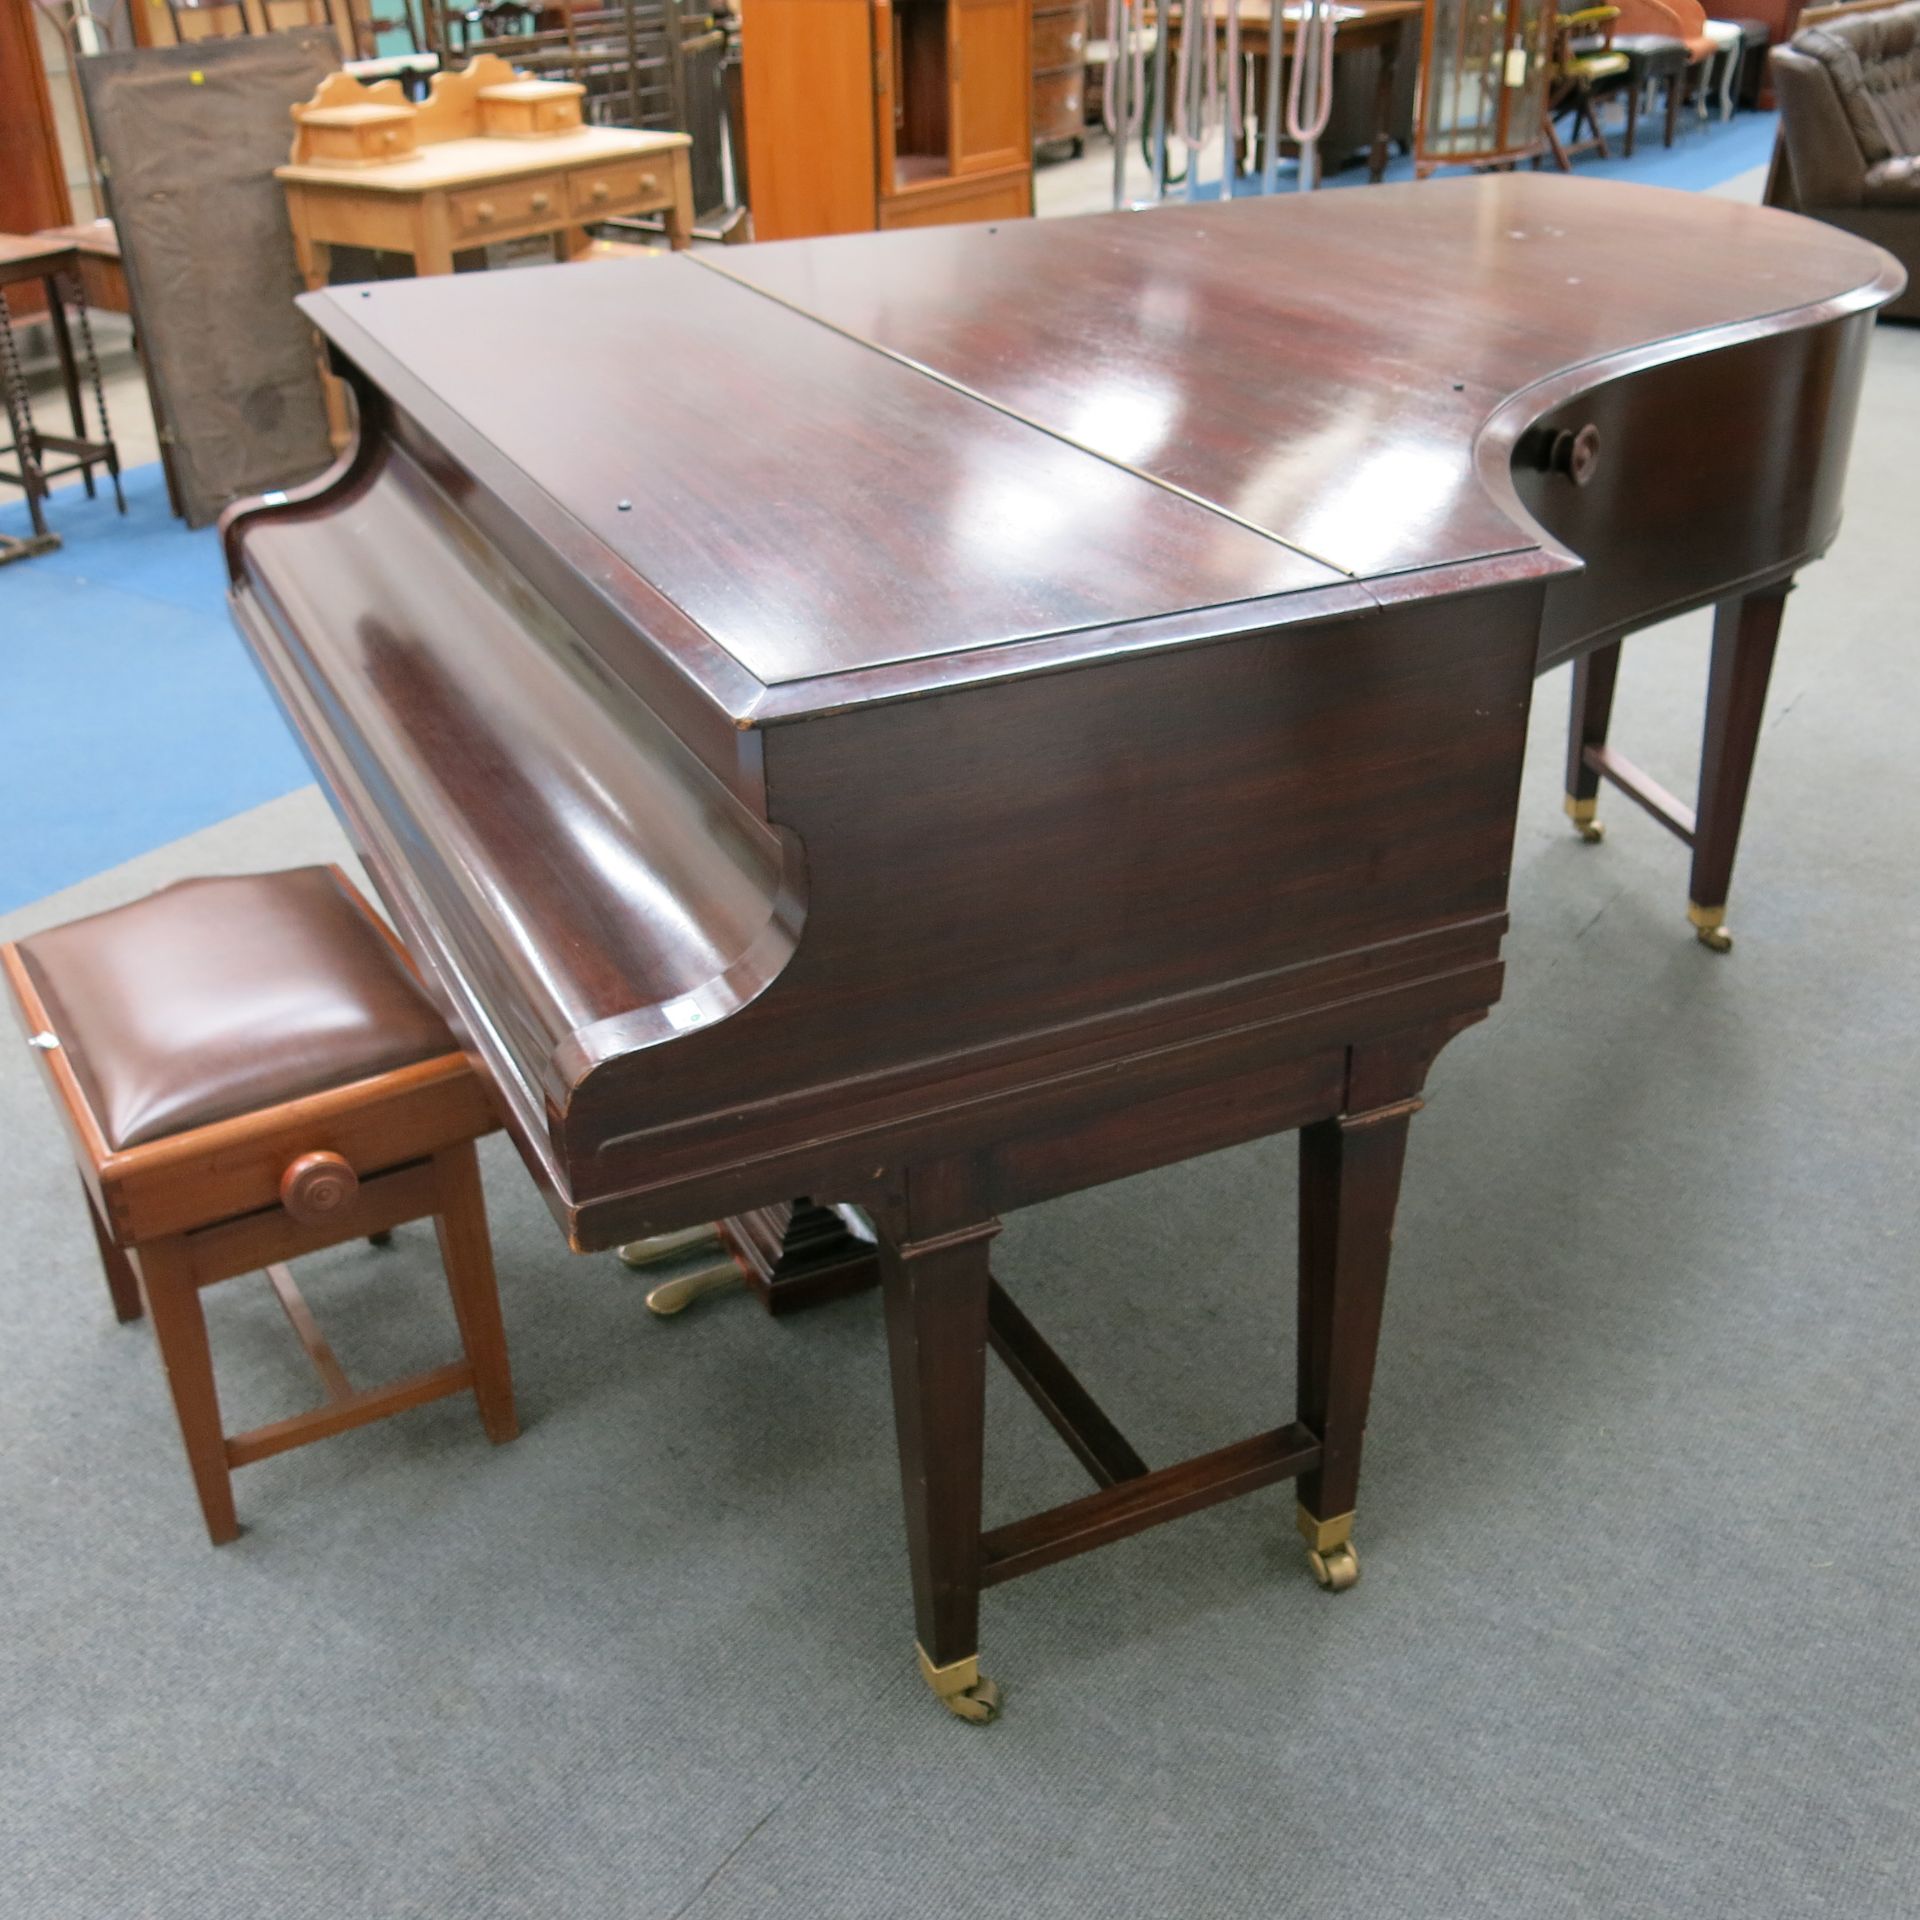 C. Bechstein Boudoir Grand Piano In Mahogany Case no 30143. The Cast Iron Frame Numbered 90951 (c. - Image 2 of 9